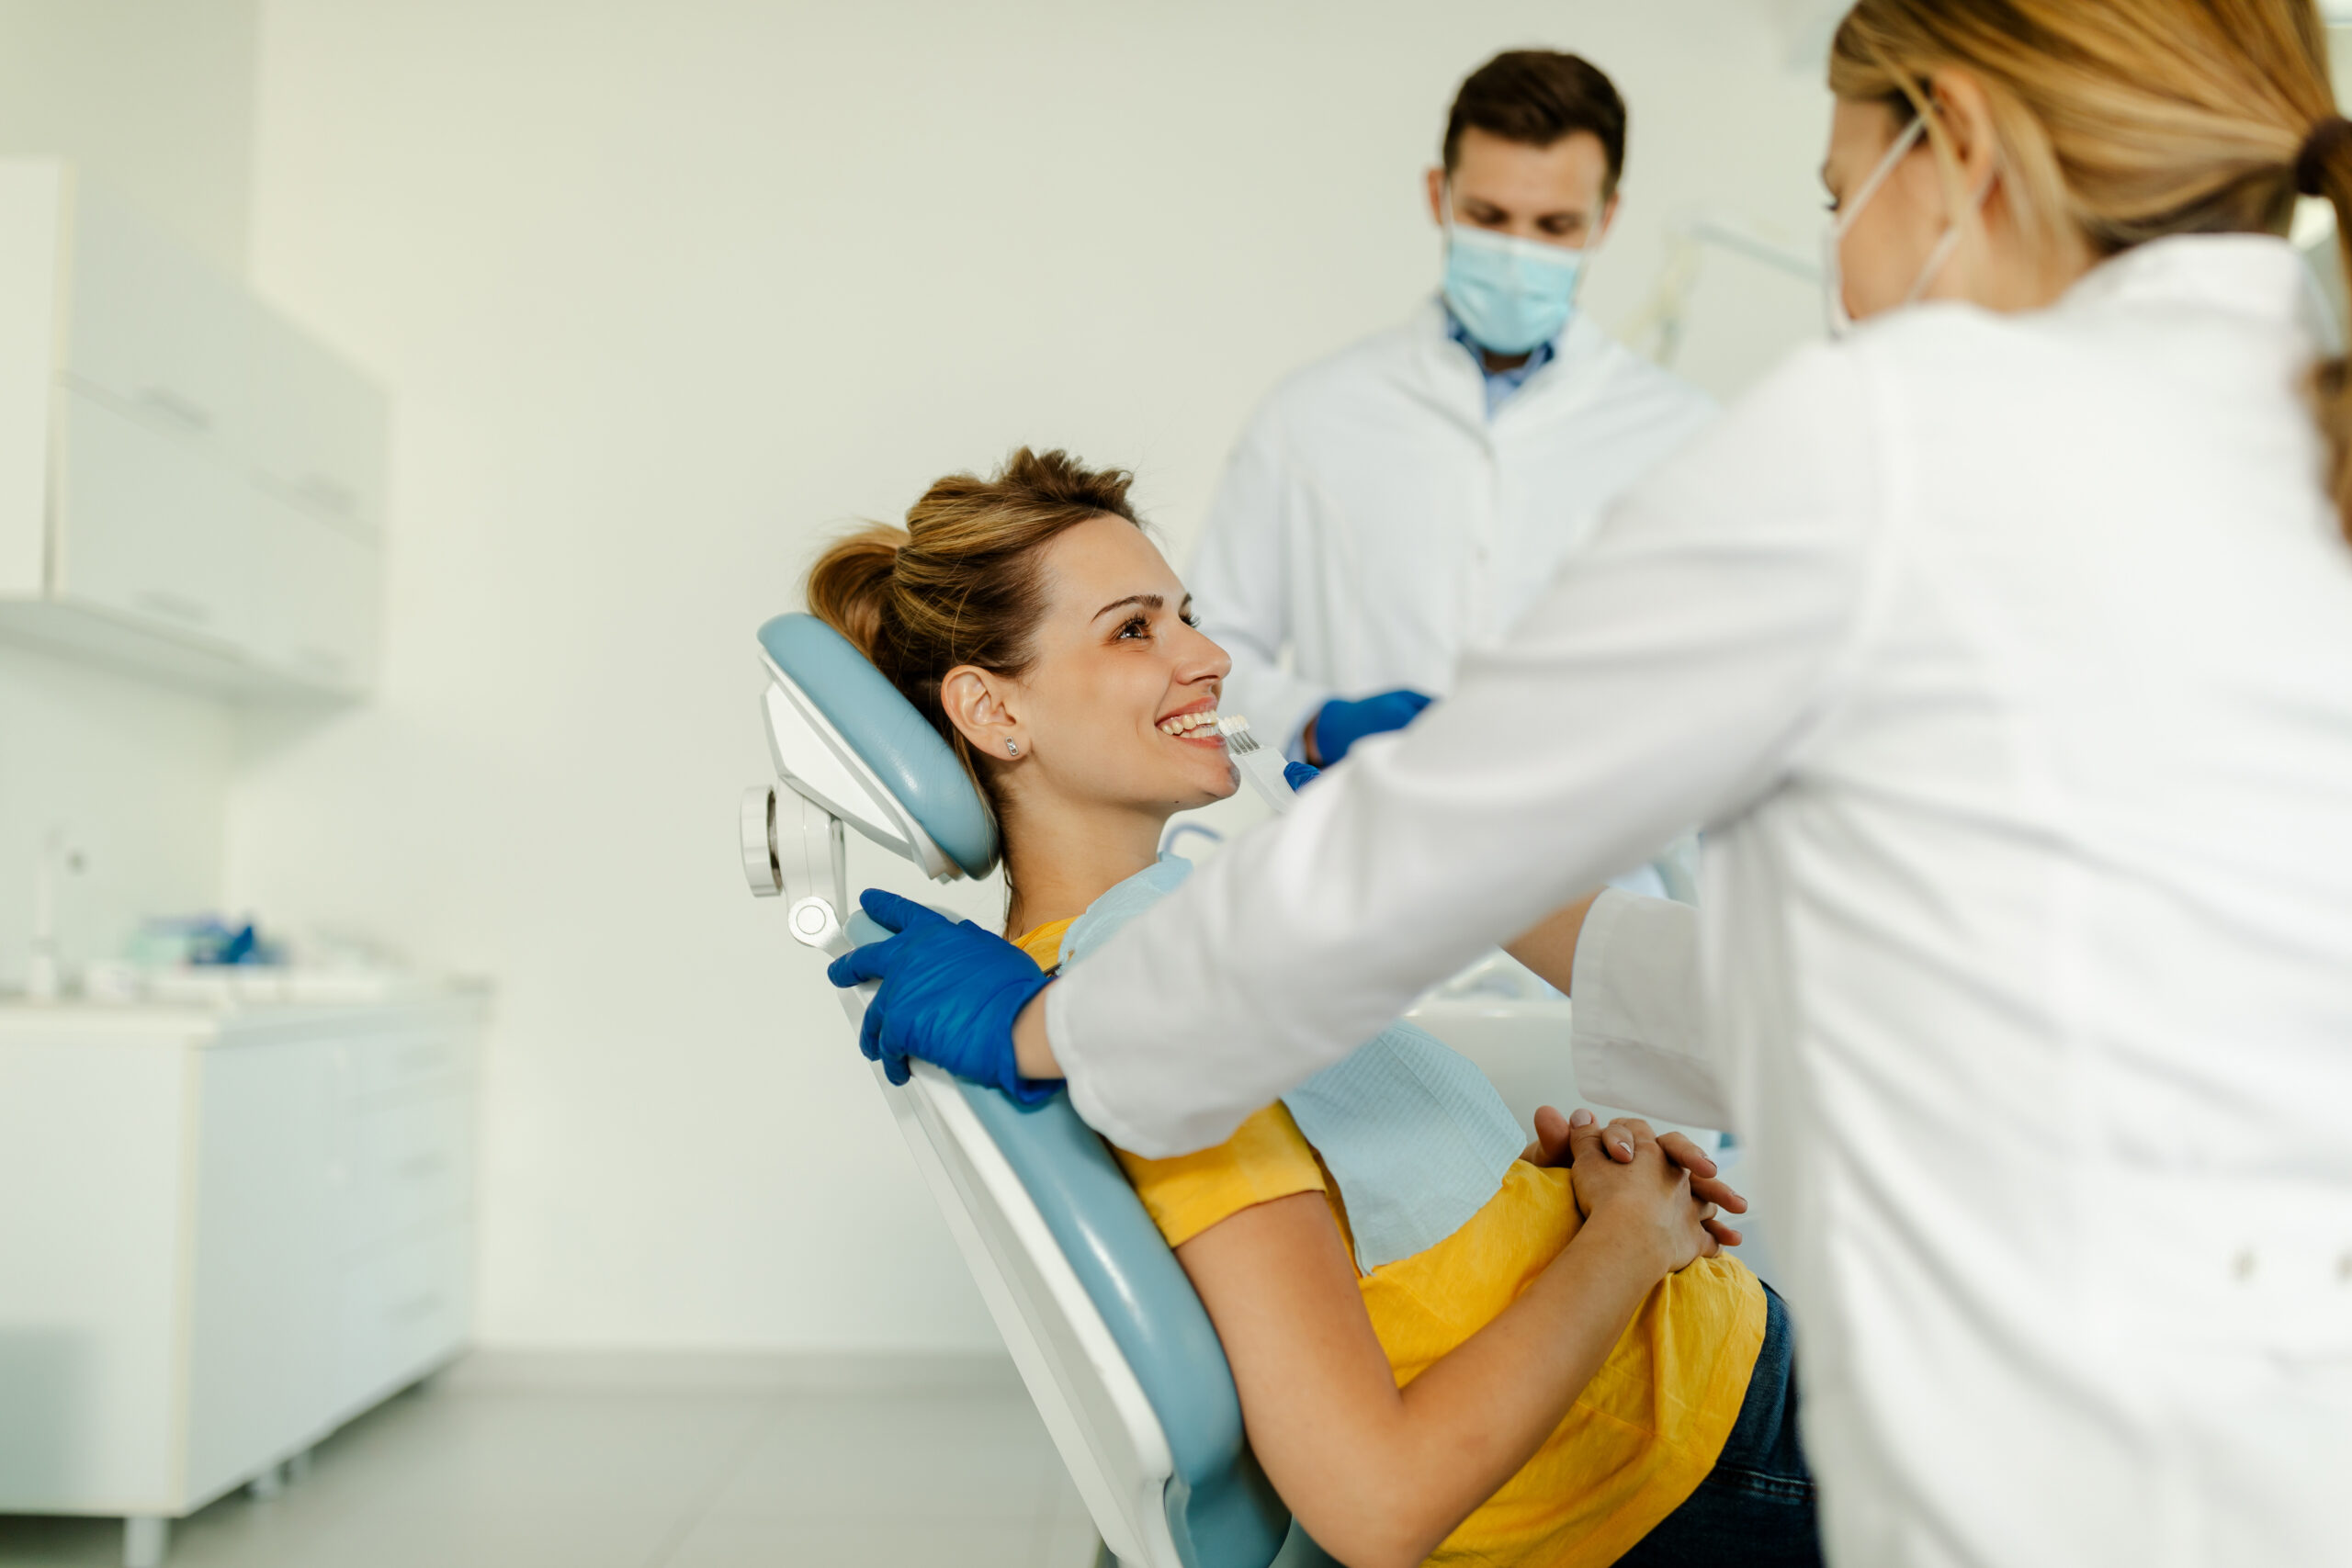 dentist talking to patient about dental care while patient reclines in dental chair